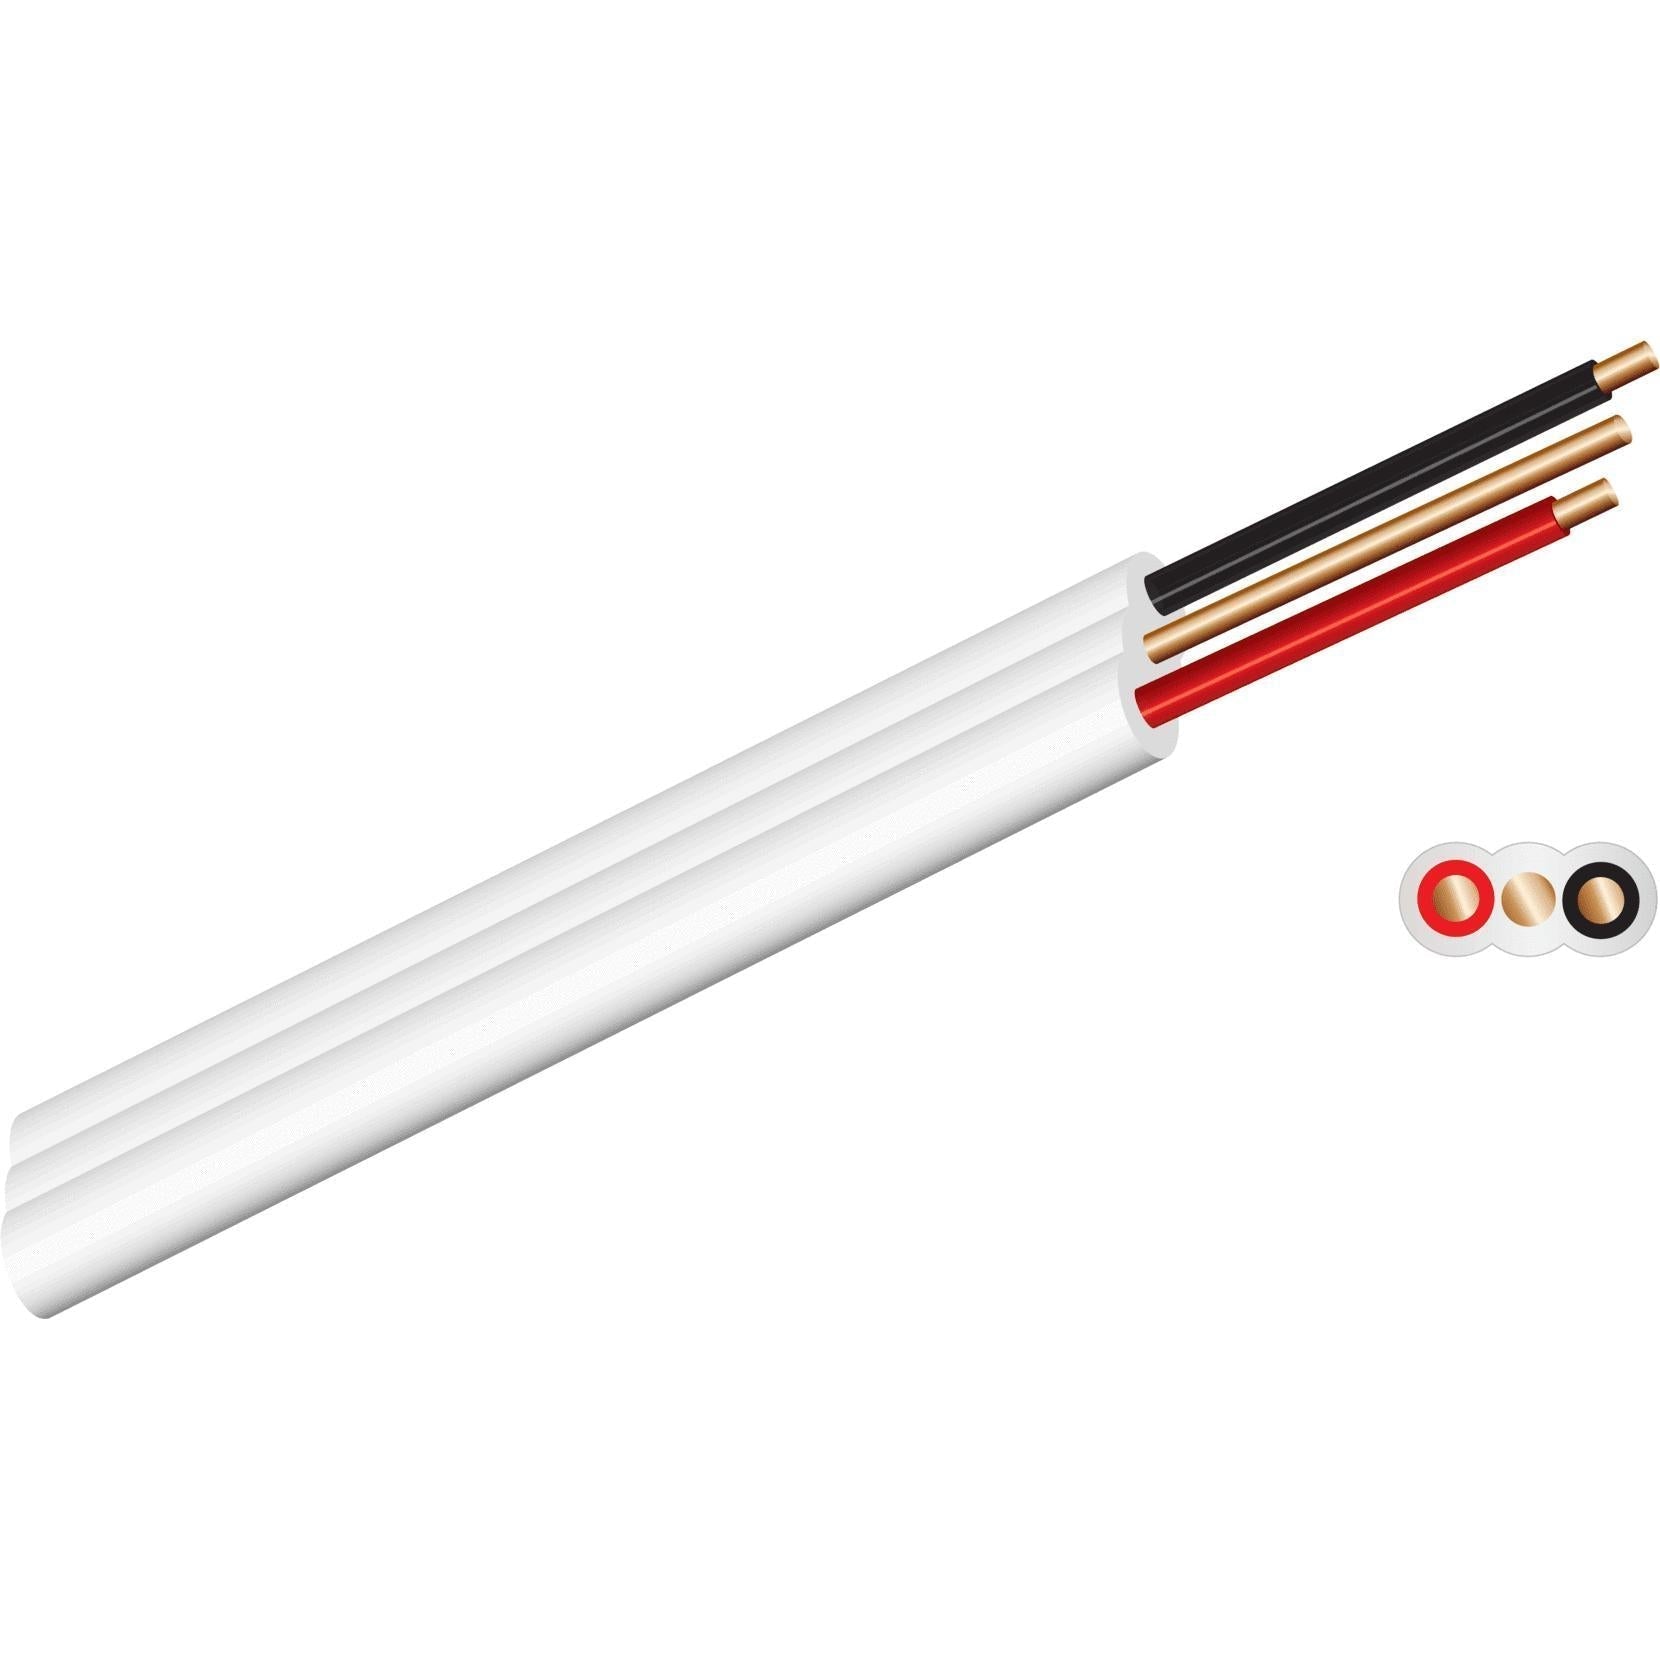 Cable Flat Twin & Earth »-Cables-Private Label Electrical-1.5mm²[red] x 𝑝/𝑚-diyshop.co.za